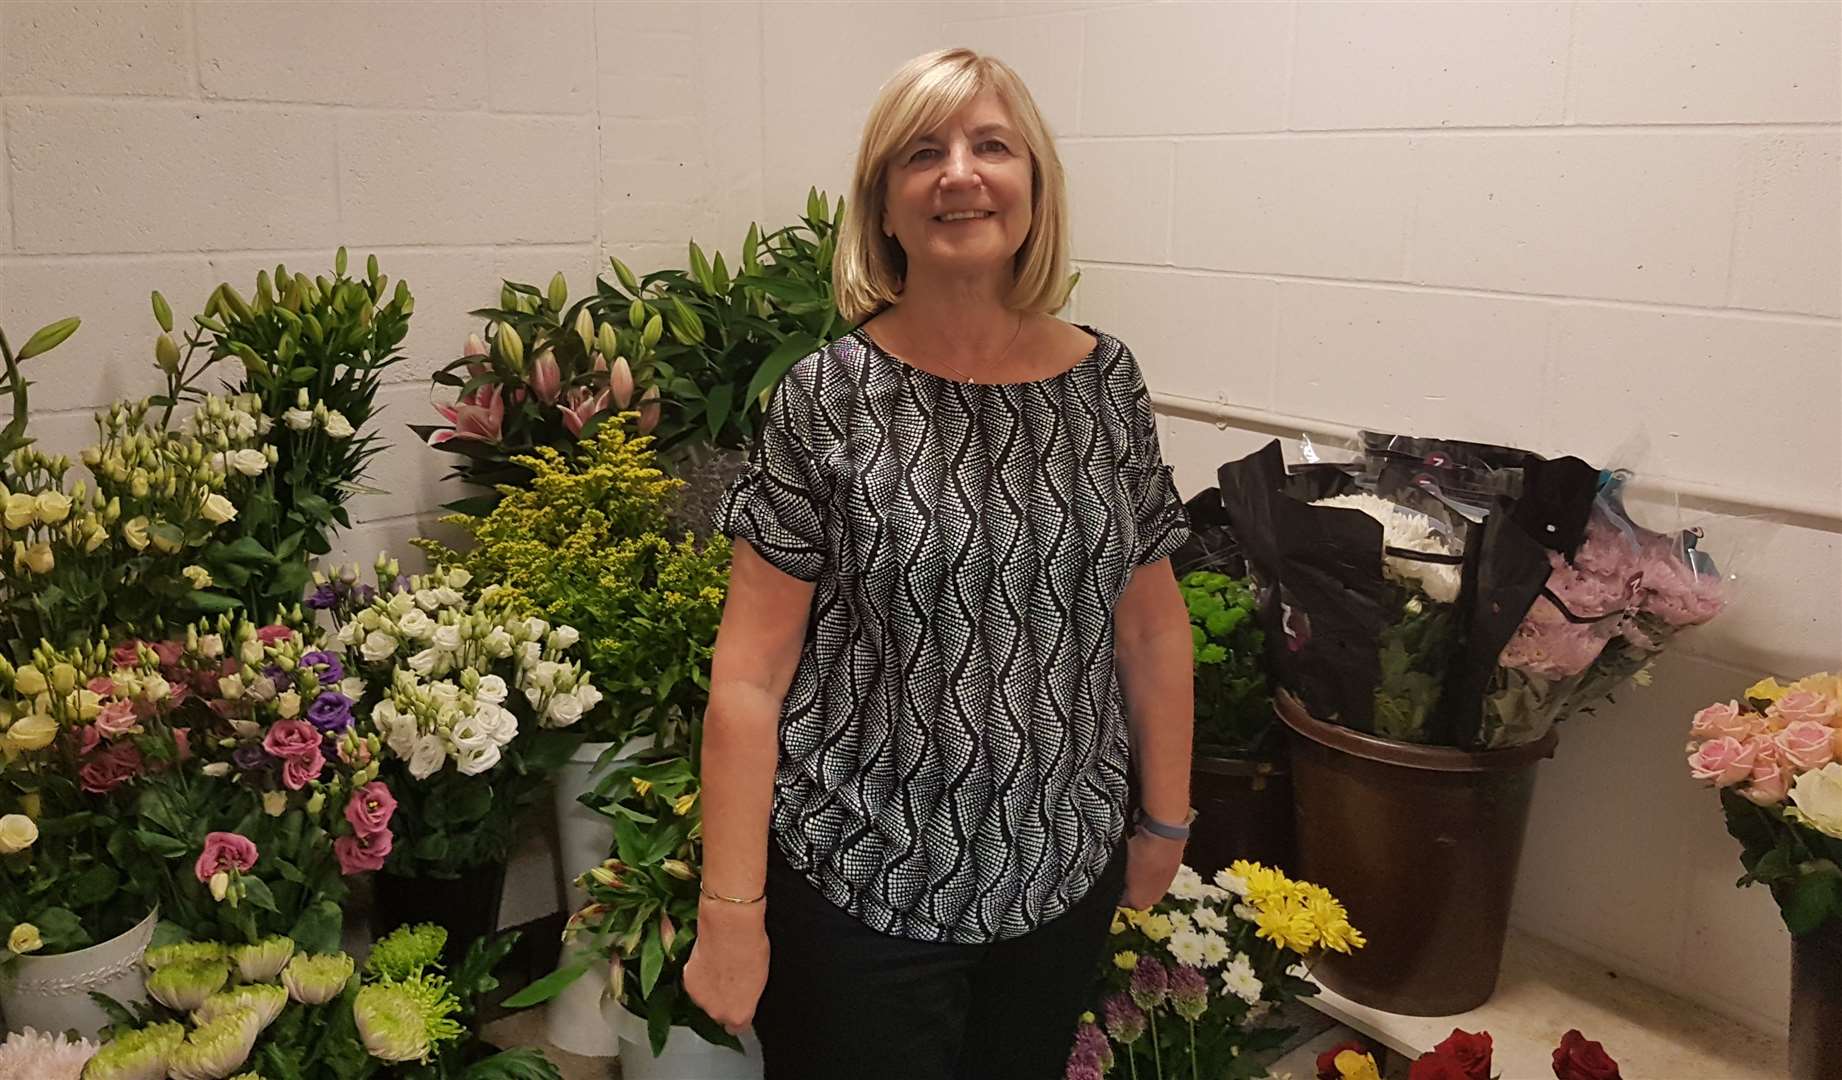 Linda Alexander of Linda's Florist believes moving to the Henwood unit full-time is the right way forward